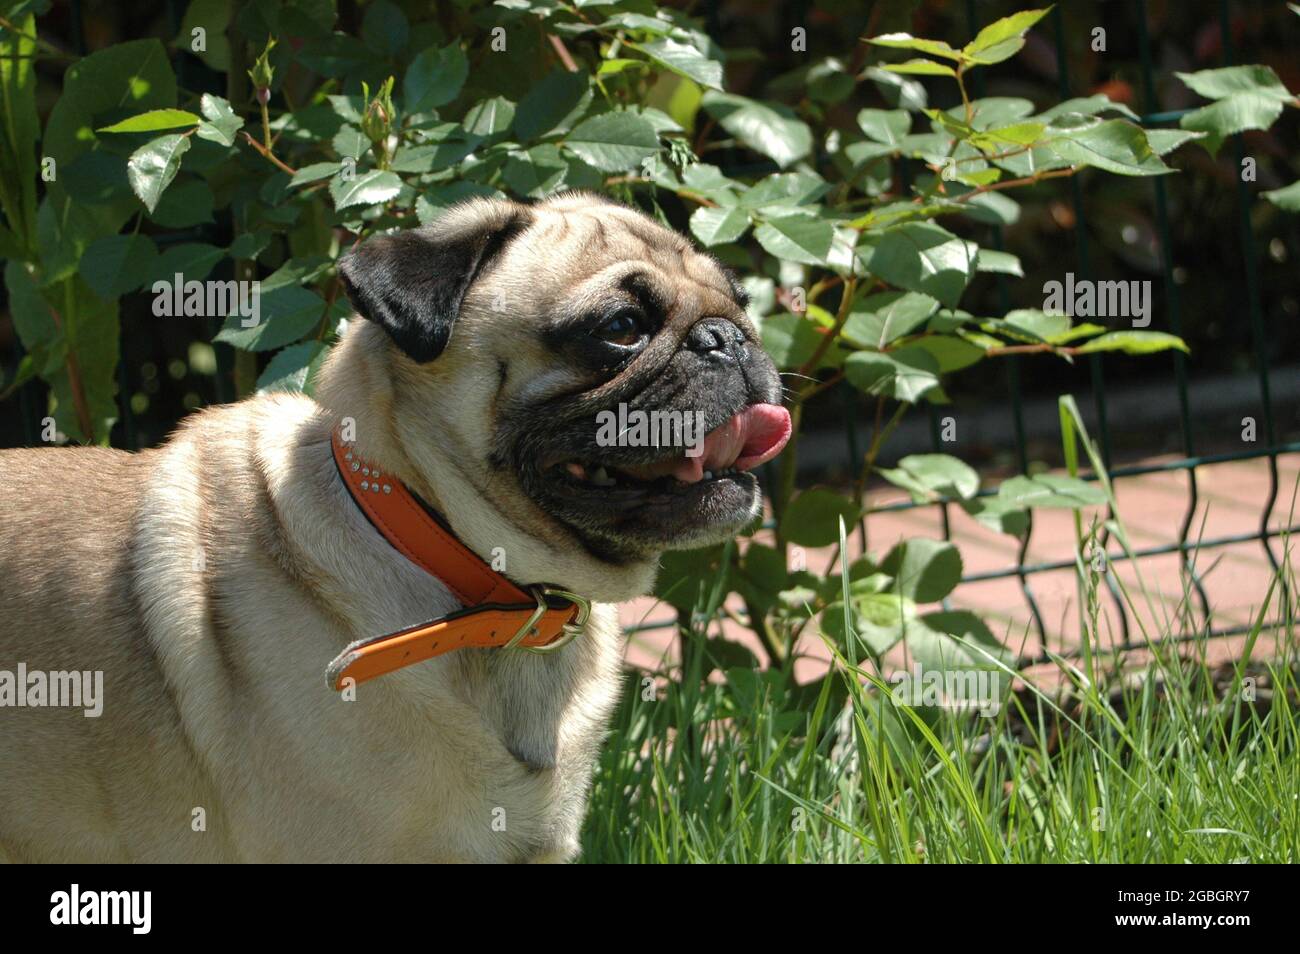 Portrait of an adorable pug dog with an orange neck belt standing in the garden Stock Photo